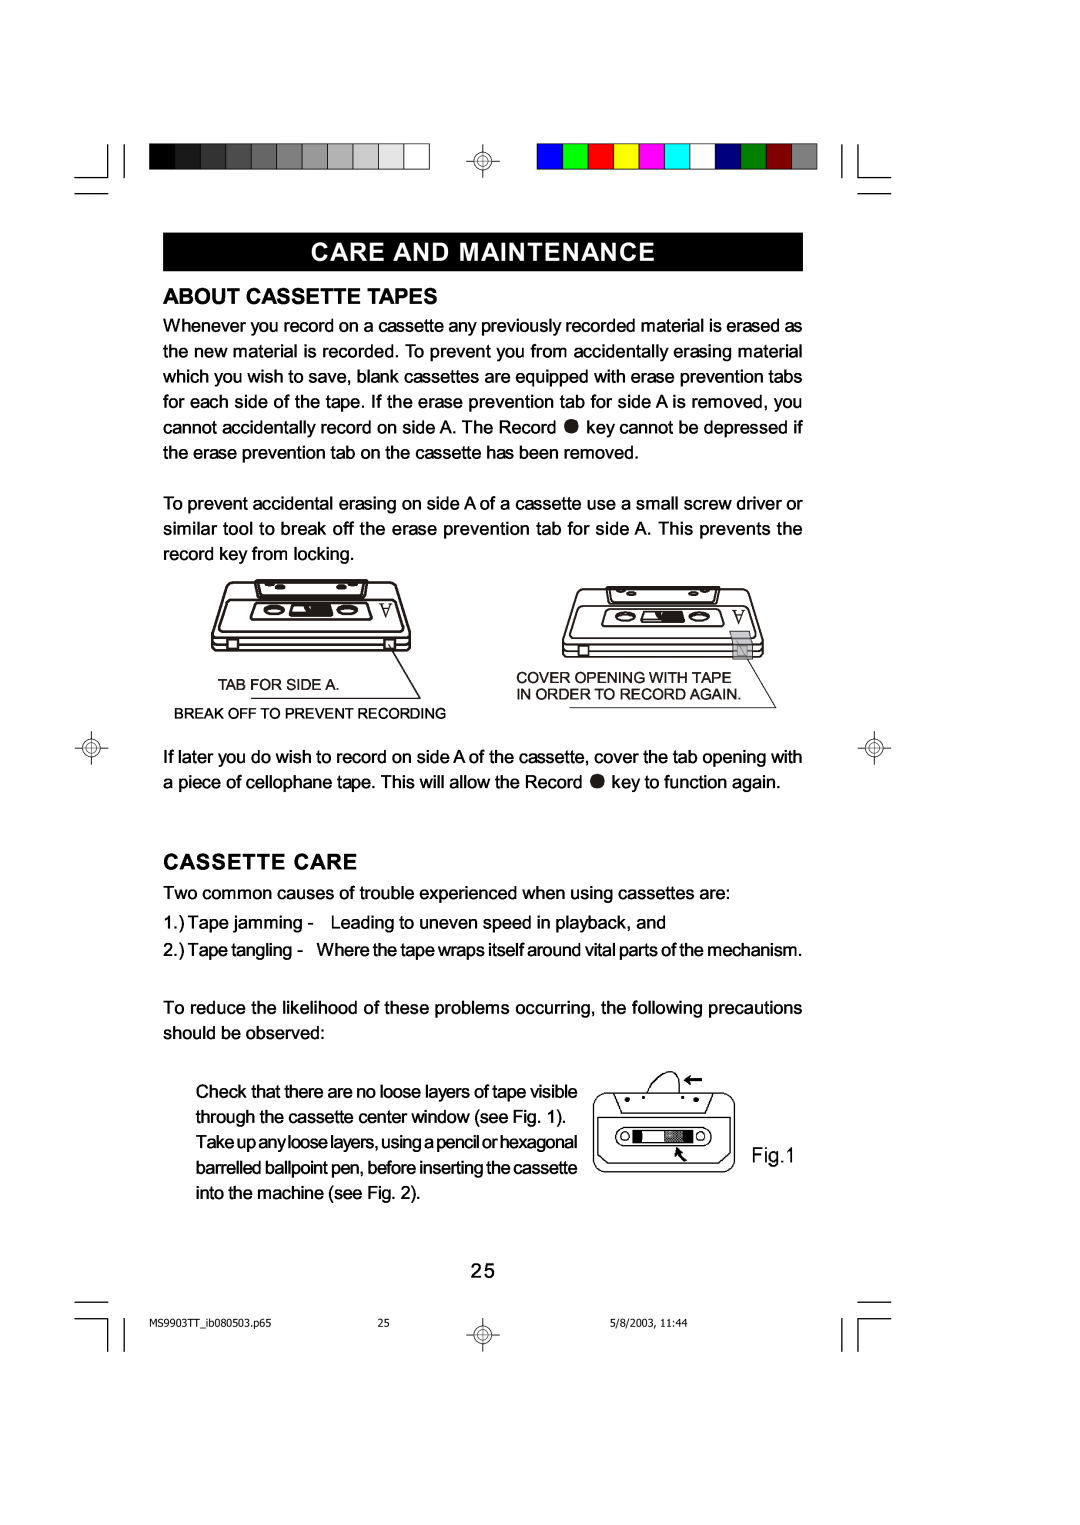 Emerson MS9904TTC owner manual Care And Maintenance, About Cassette Tapes, Cassette Care 